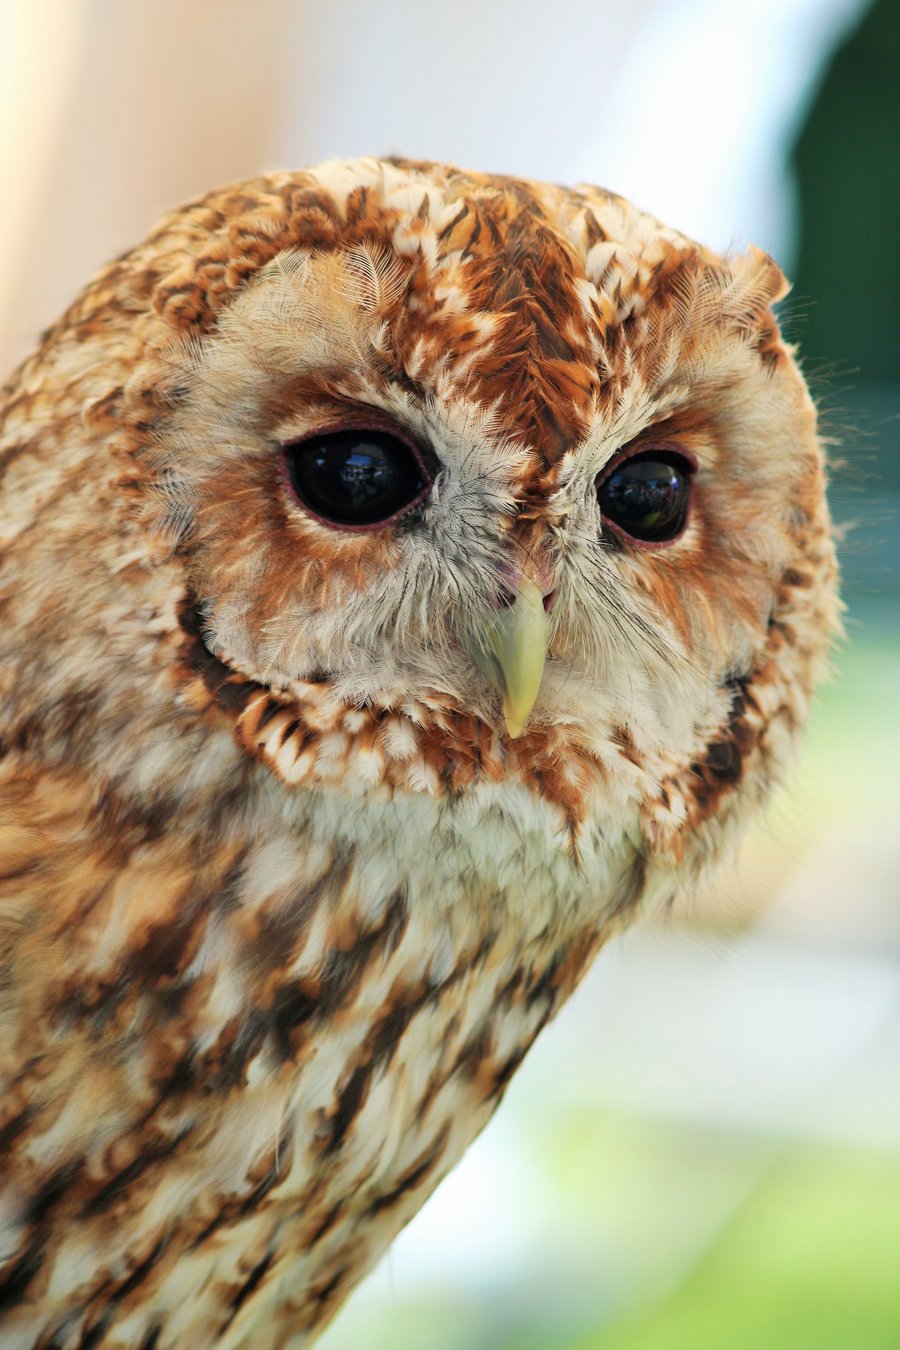 Photographic greetings card of a Tawny Owl